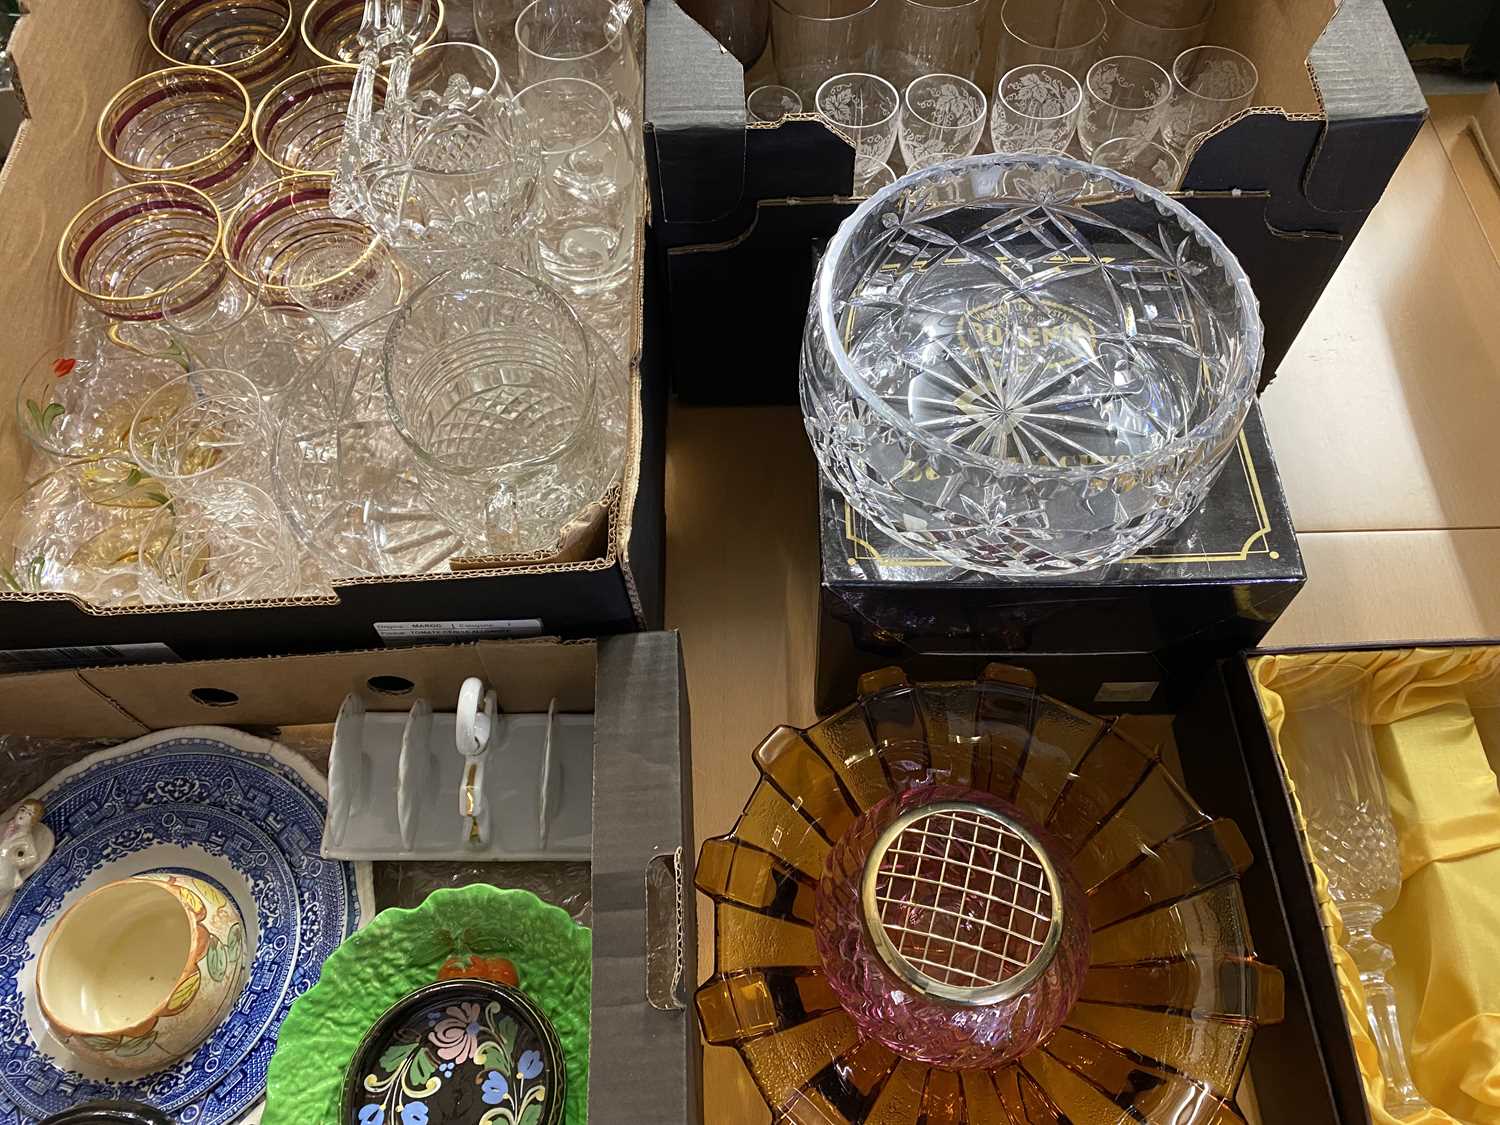 VINTAGE & LATER CUT & OTHER GLASSWARE - with a small quantity of decorative pottery and porcelain